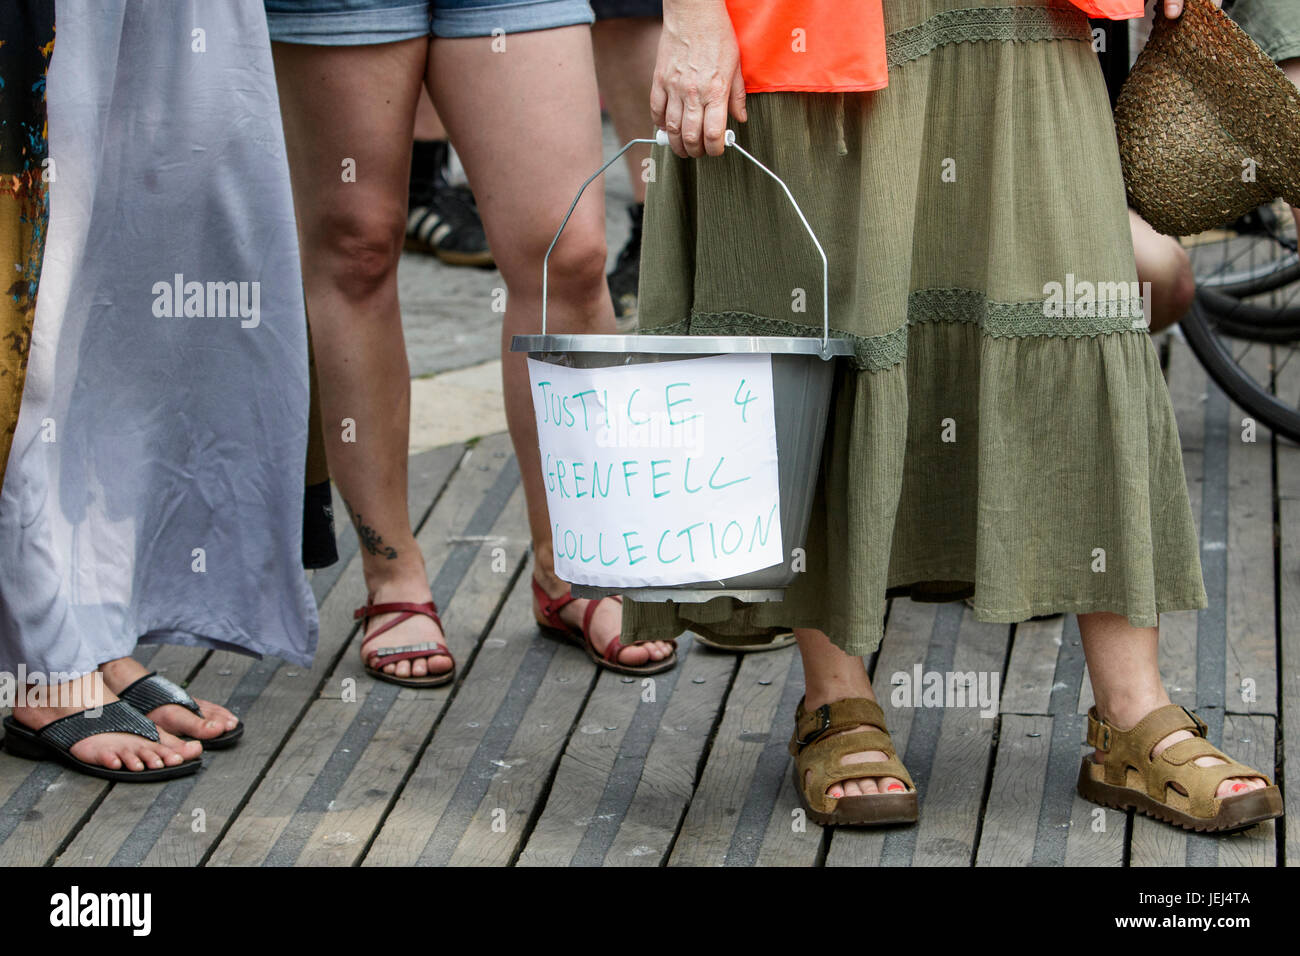 A collection bucket for donations for the Grenfell residents is pictured before the start of the Austerity kills,Justice for Grenfell march in Bristol Stock Photo